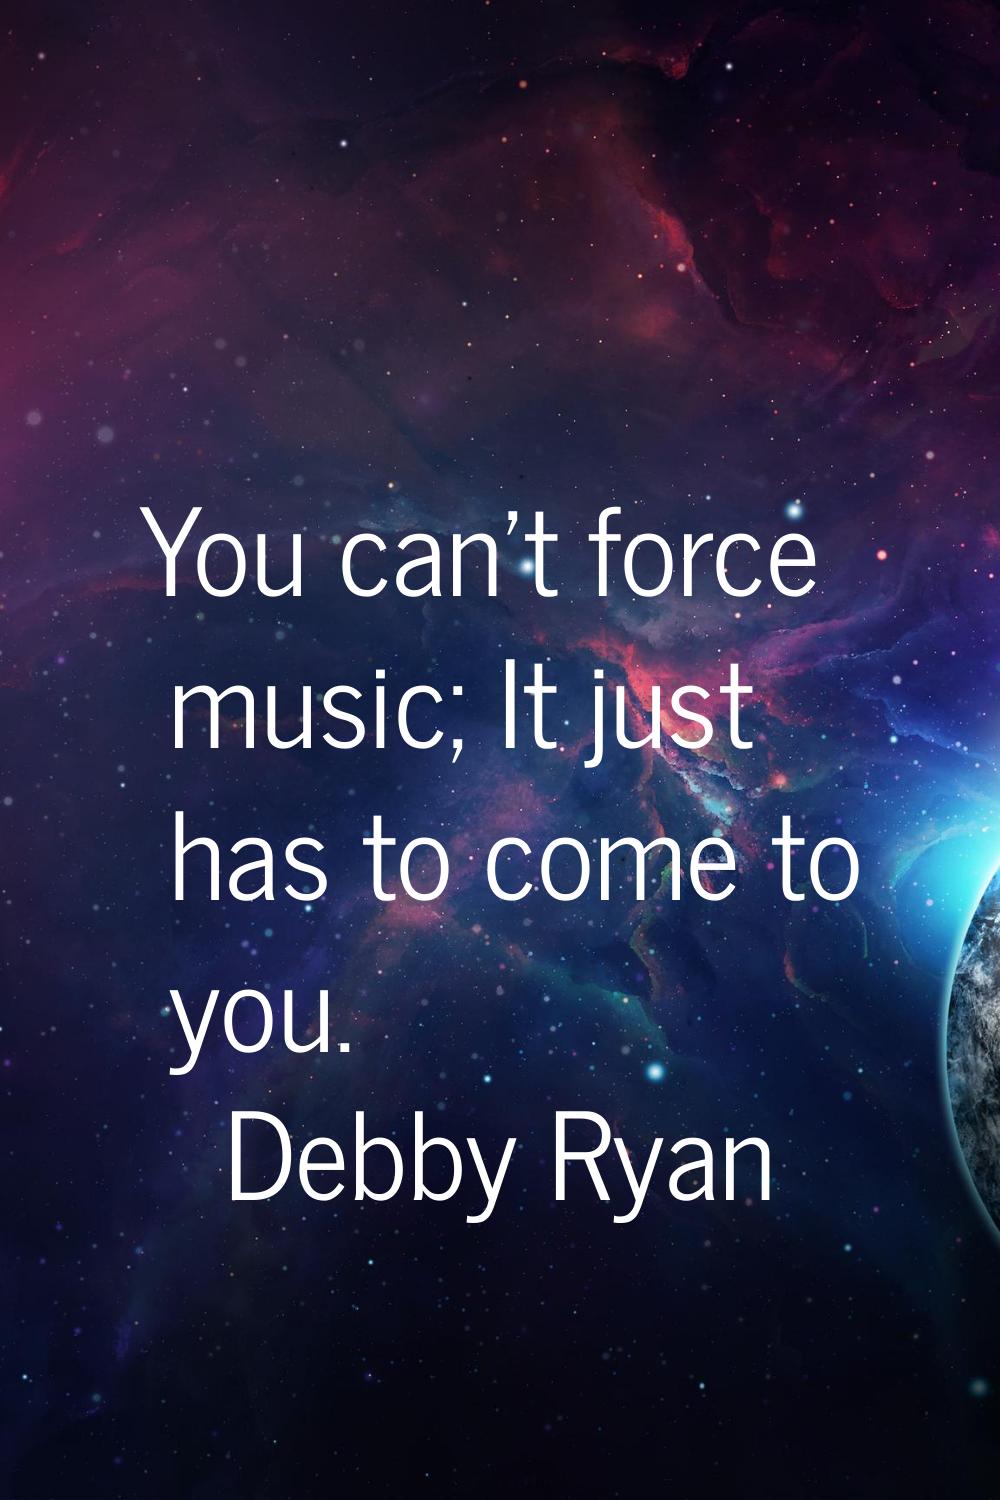 You can't force music; It just has to come to you.